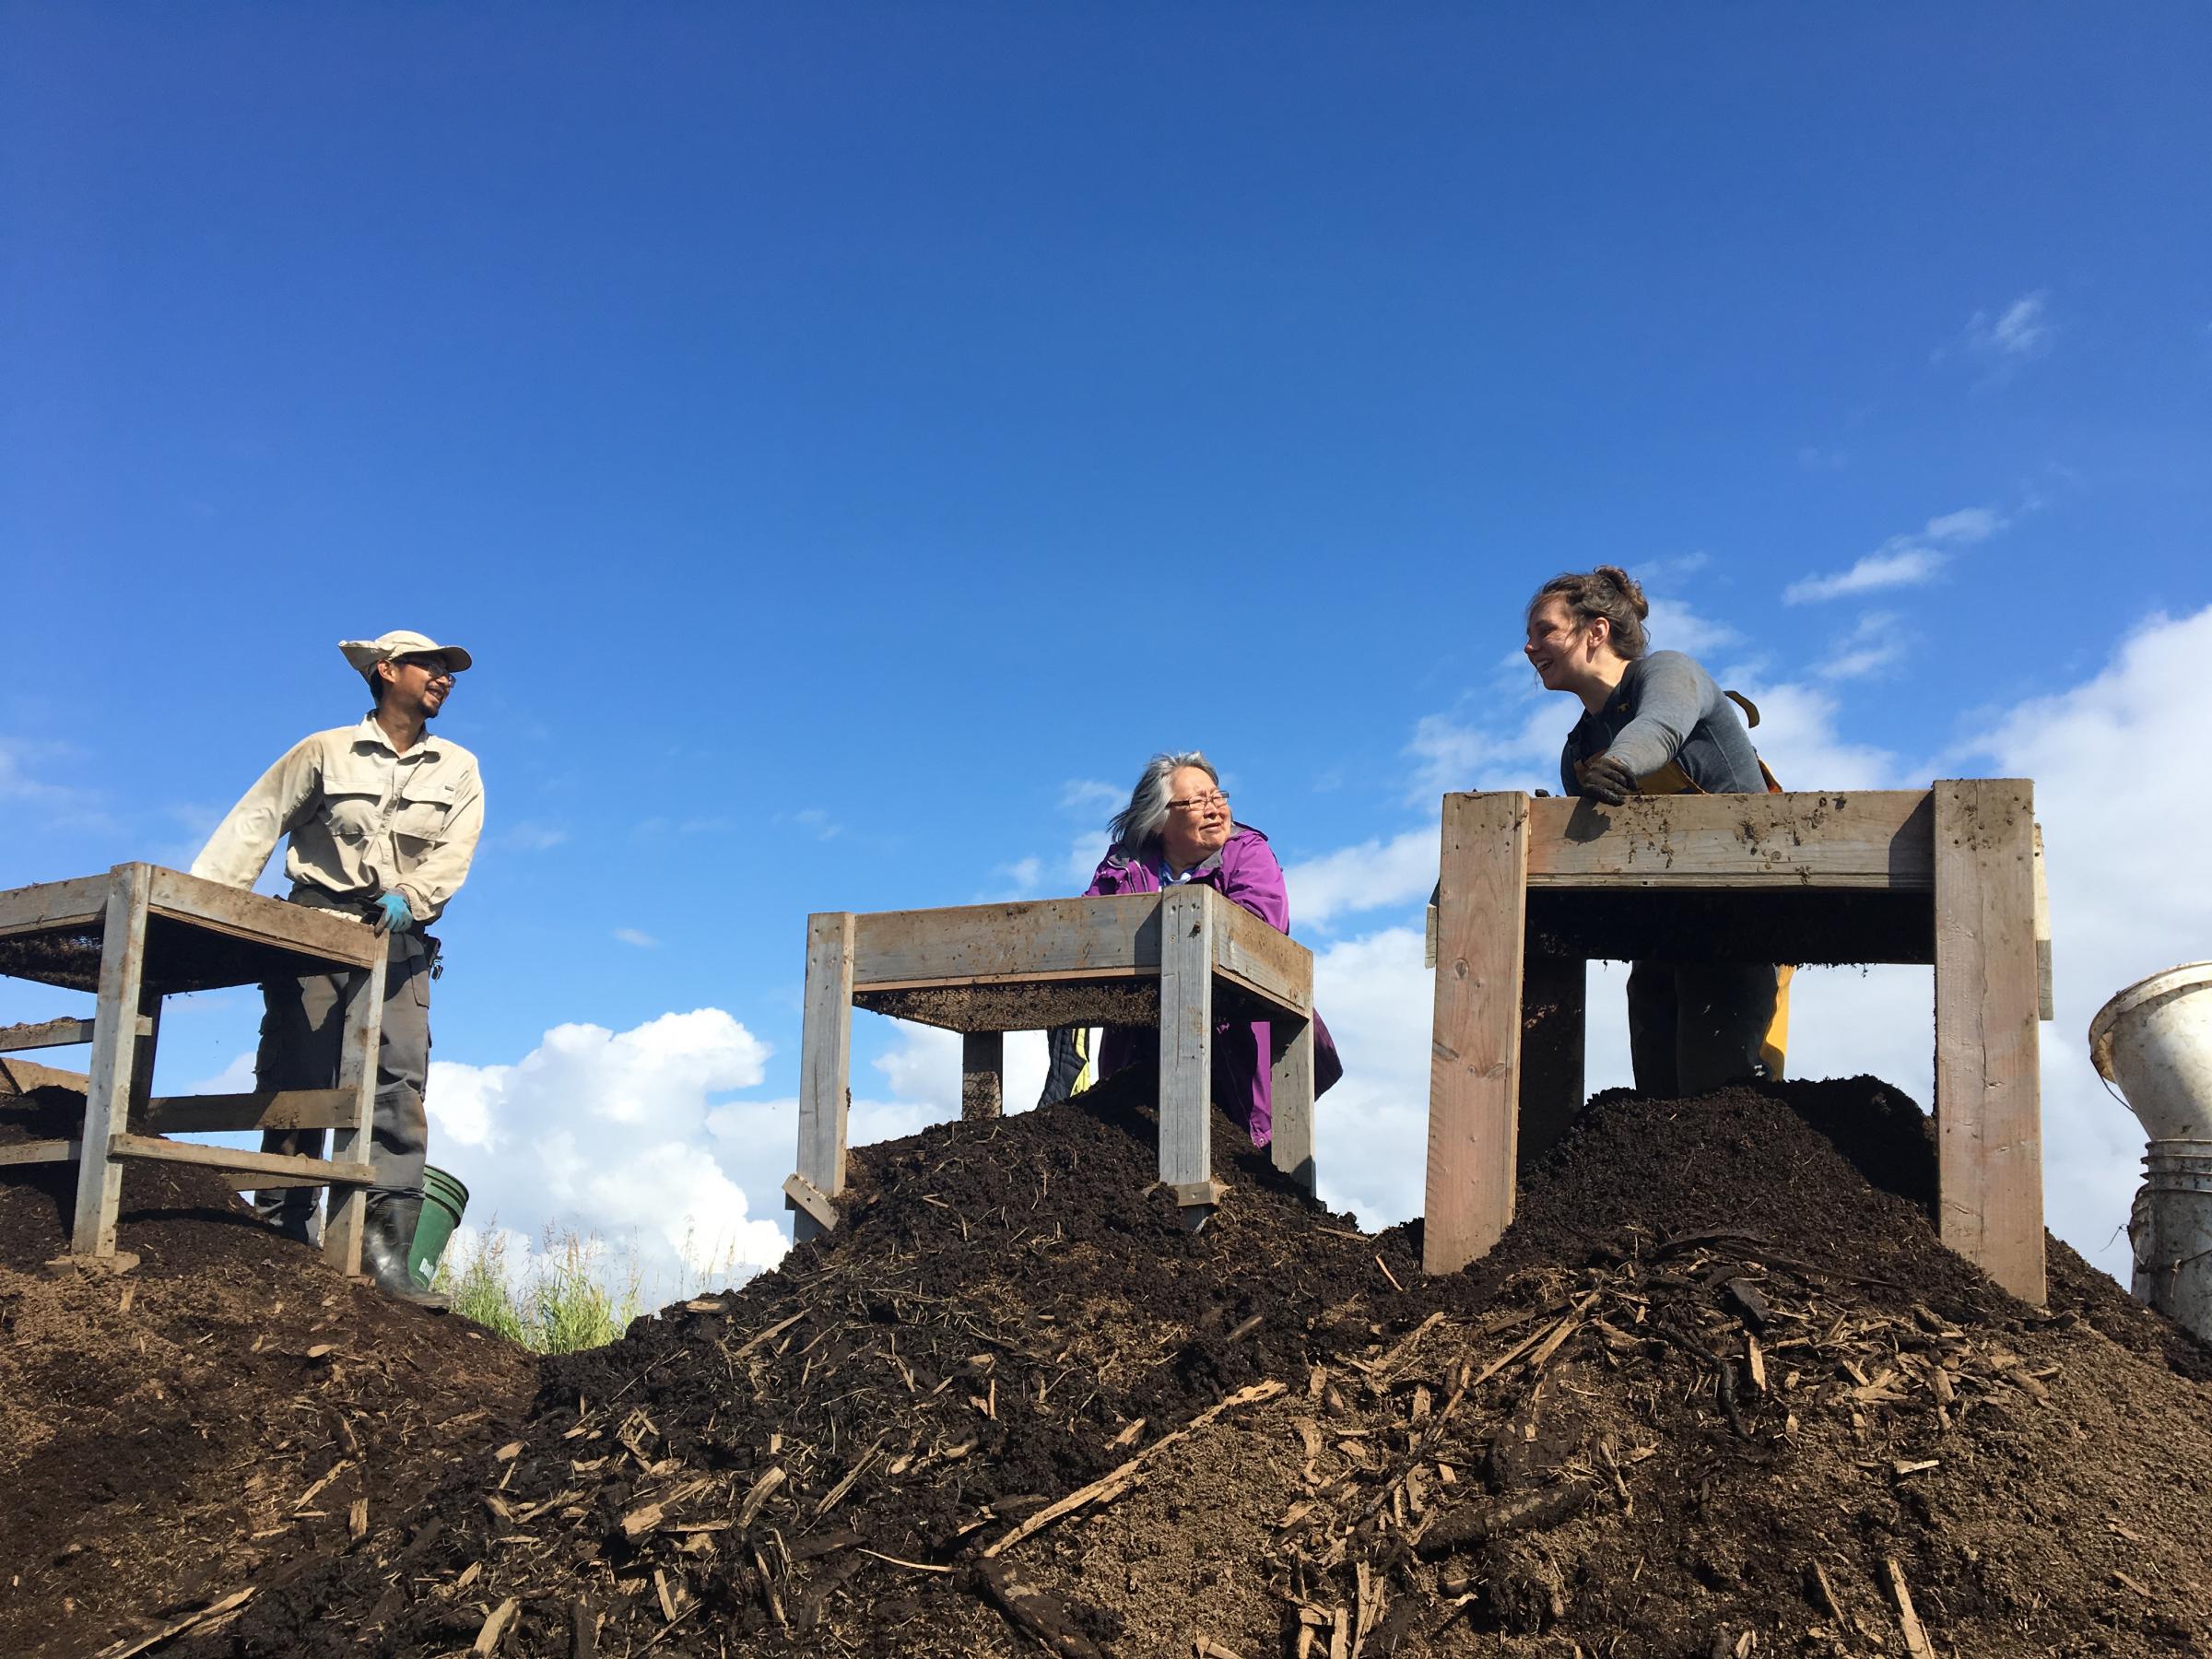 Doctoral student Jonathan Lim, left, and elder Mary Beaver laugh with another volunteer at the dig site. Quinhagak residents made several table-screens for the dig, which help volunteers sift through the soil for ancient bits of hair and bone. (Photo by Teresa Cotsirilos/KYUK)